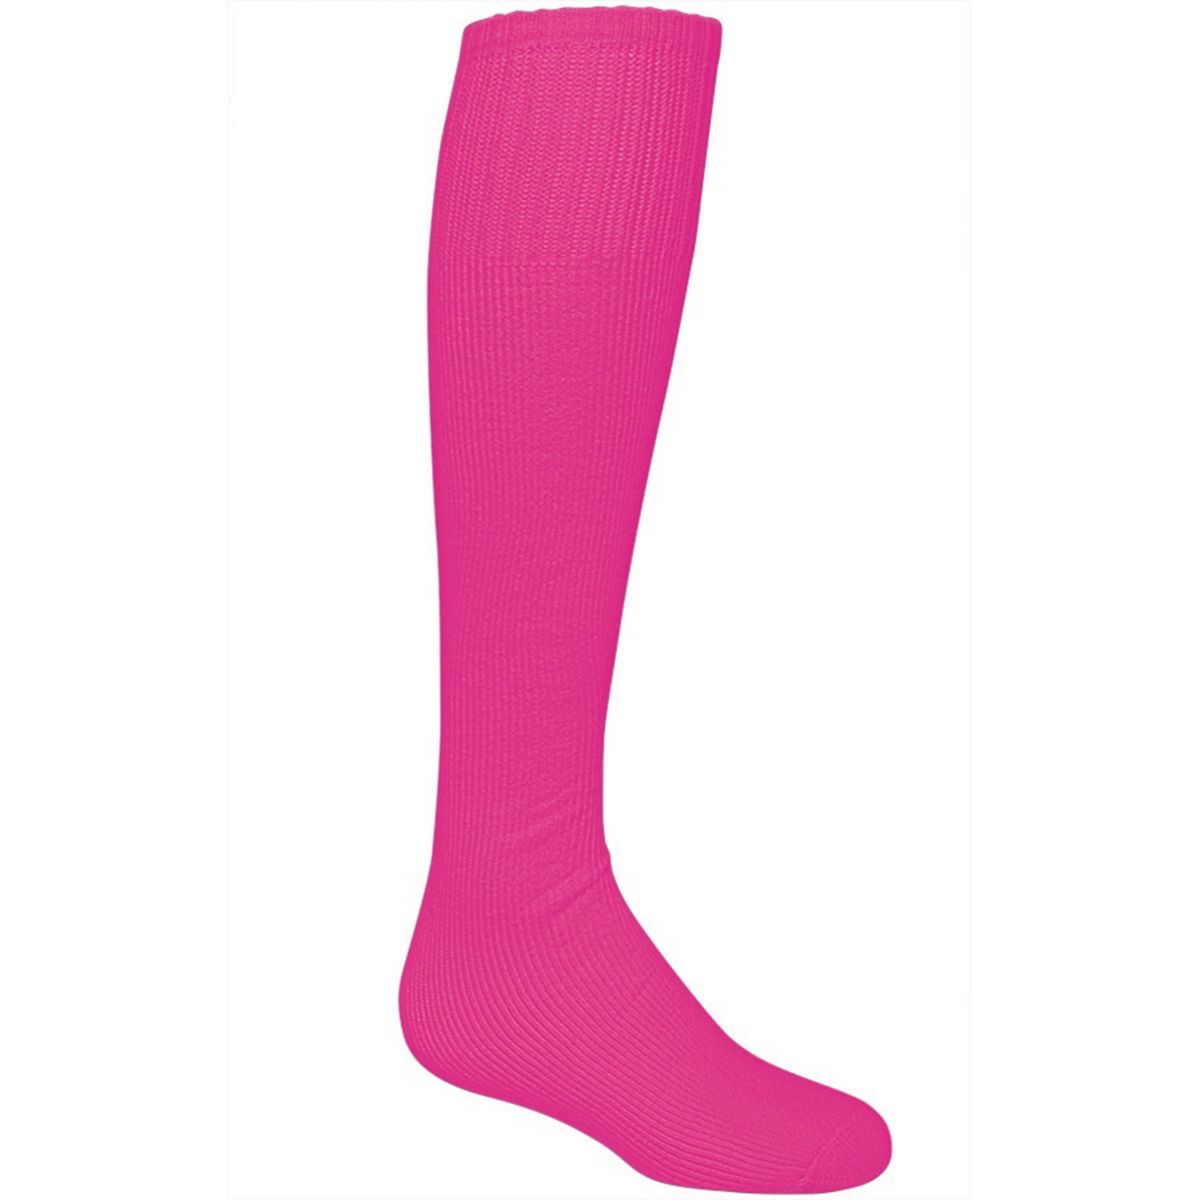 High 5 Athletic  Sock in Raspberry  -Part of the Accessories, High5-Products, Accessories-Socks product lines at KanaleyCreations.com